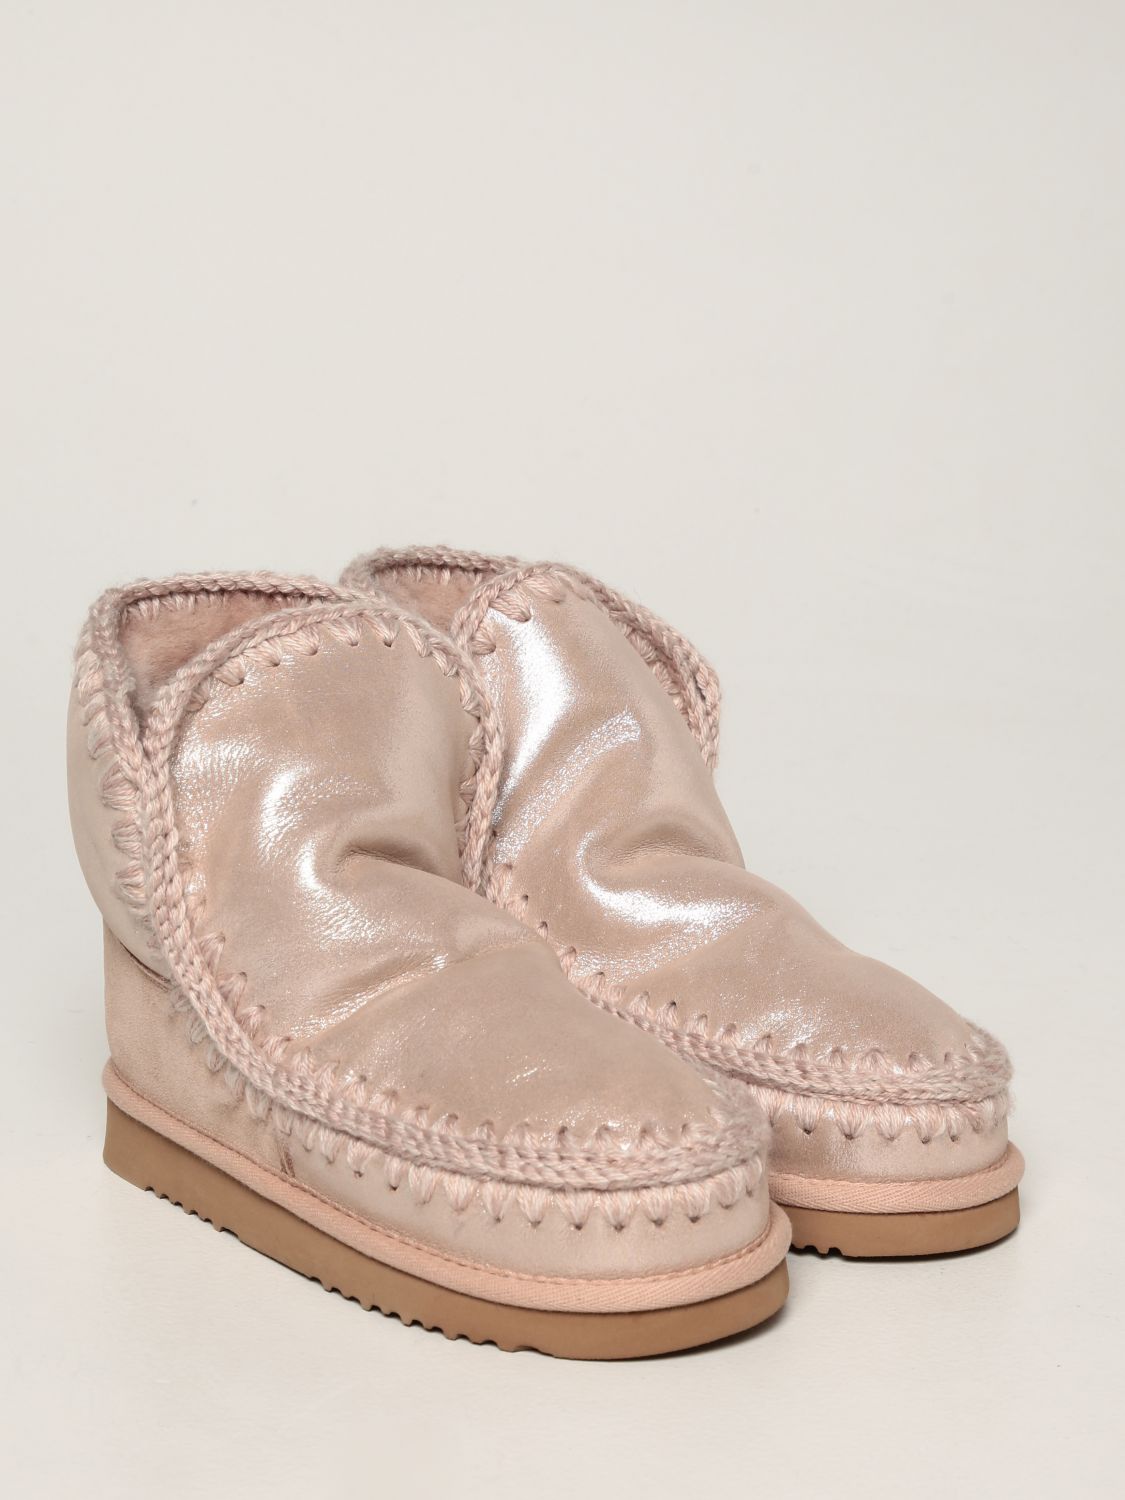 Bottines plates Mou: Chaussures femme Mou rose 2